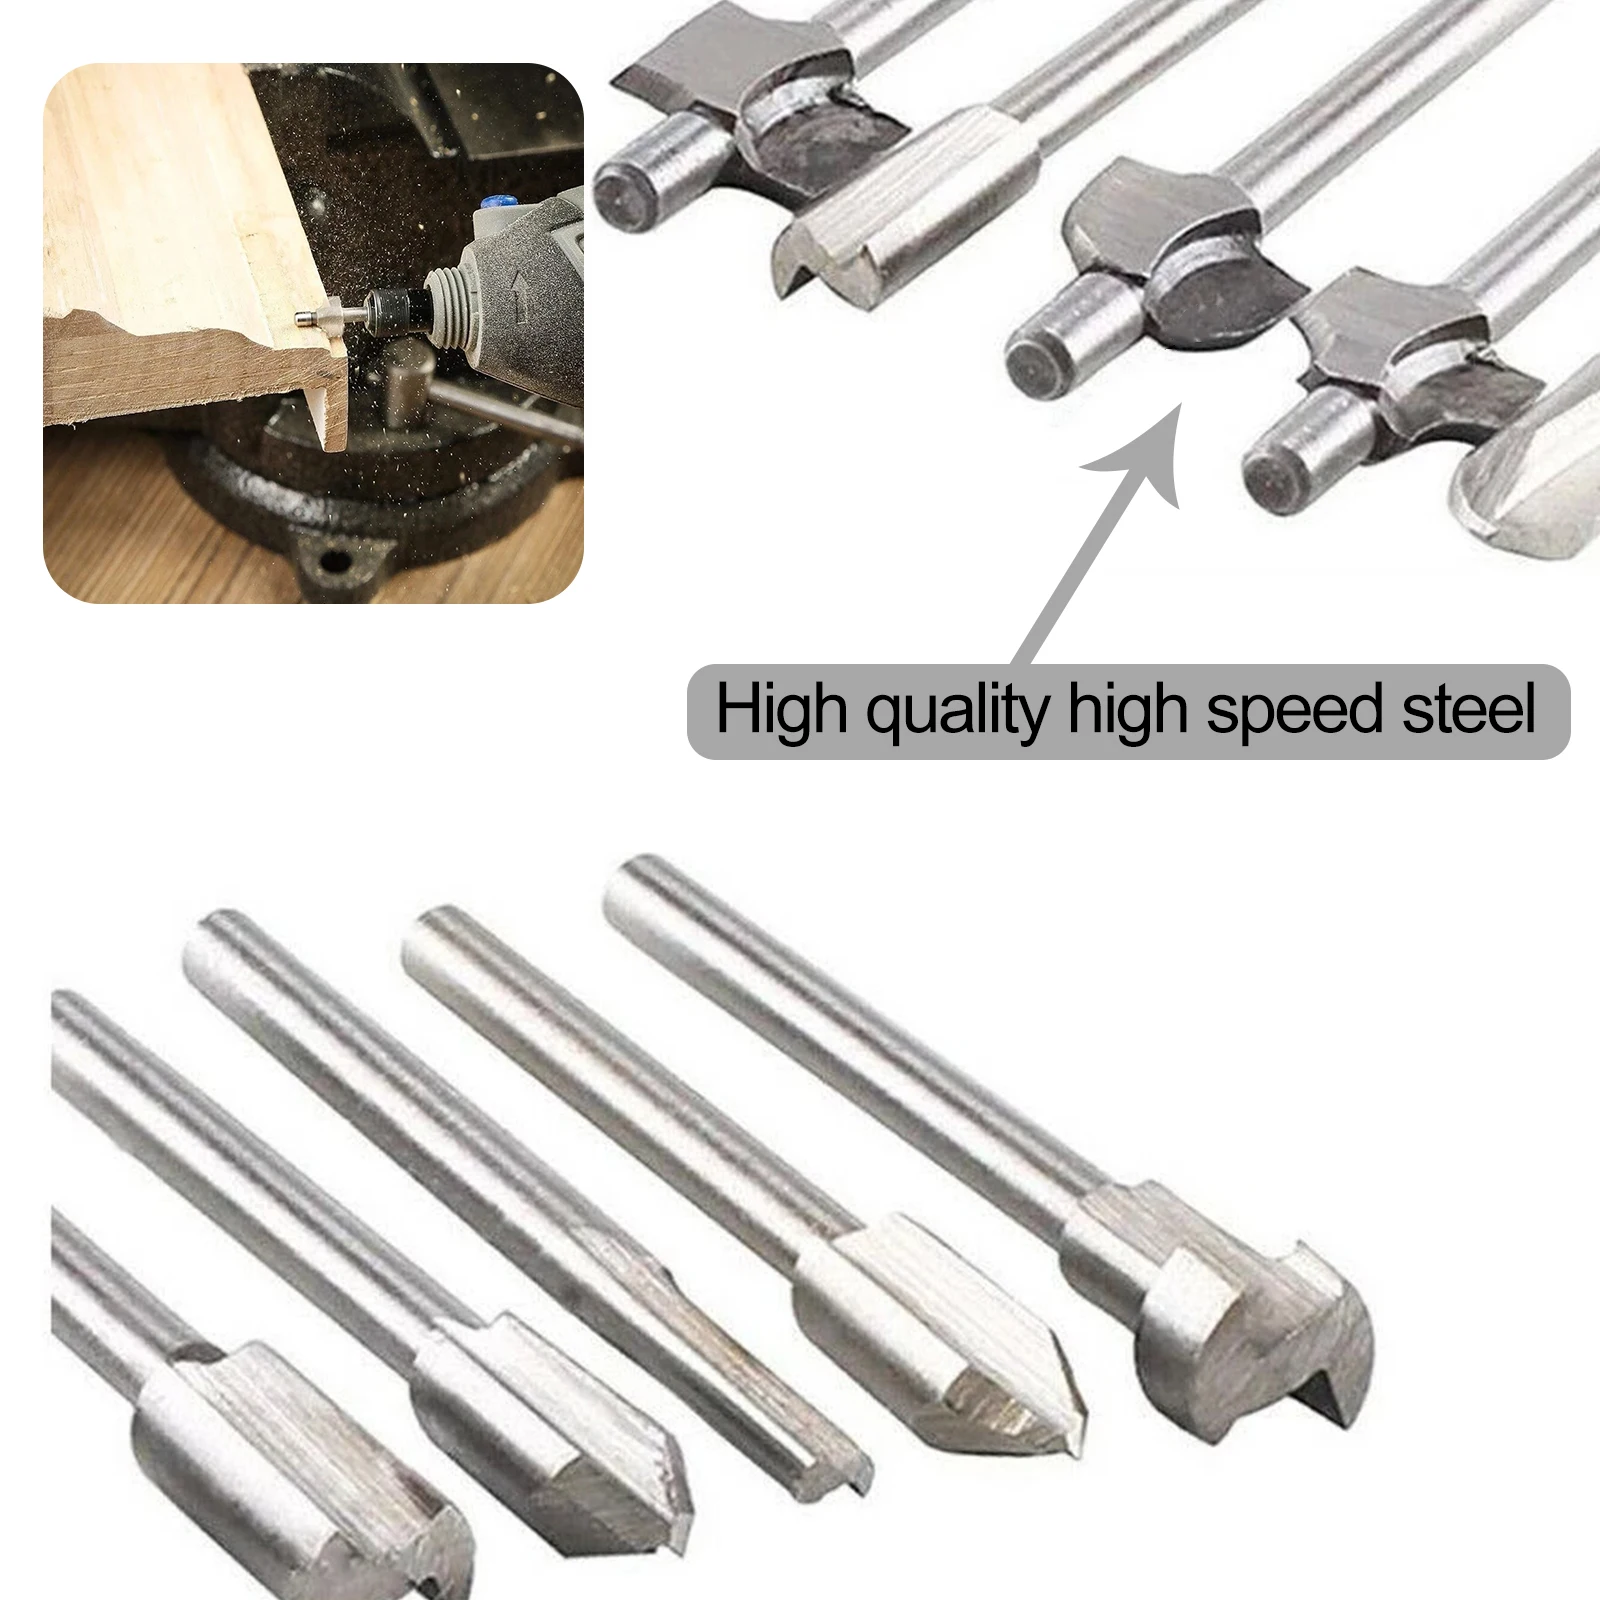 10pcs 3.2mm Routing Router Drill Bits Set Wood Stone Metal Root Carving Milling Cutter For Dremel Rotary Tool 2 stroke cut off saw concrete wood stone saw cutter single cylinder